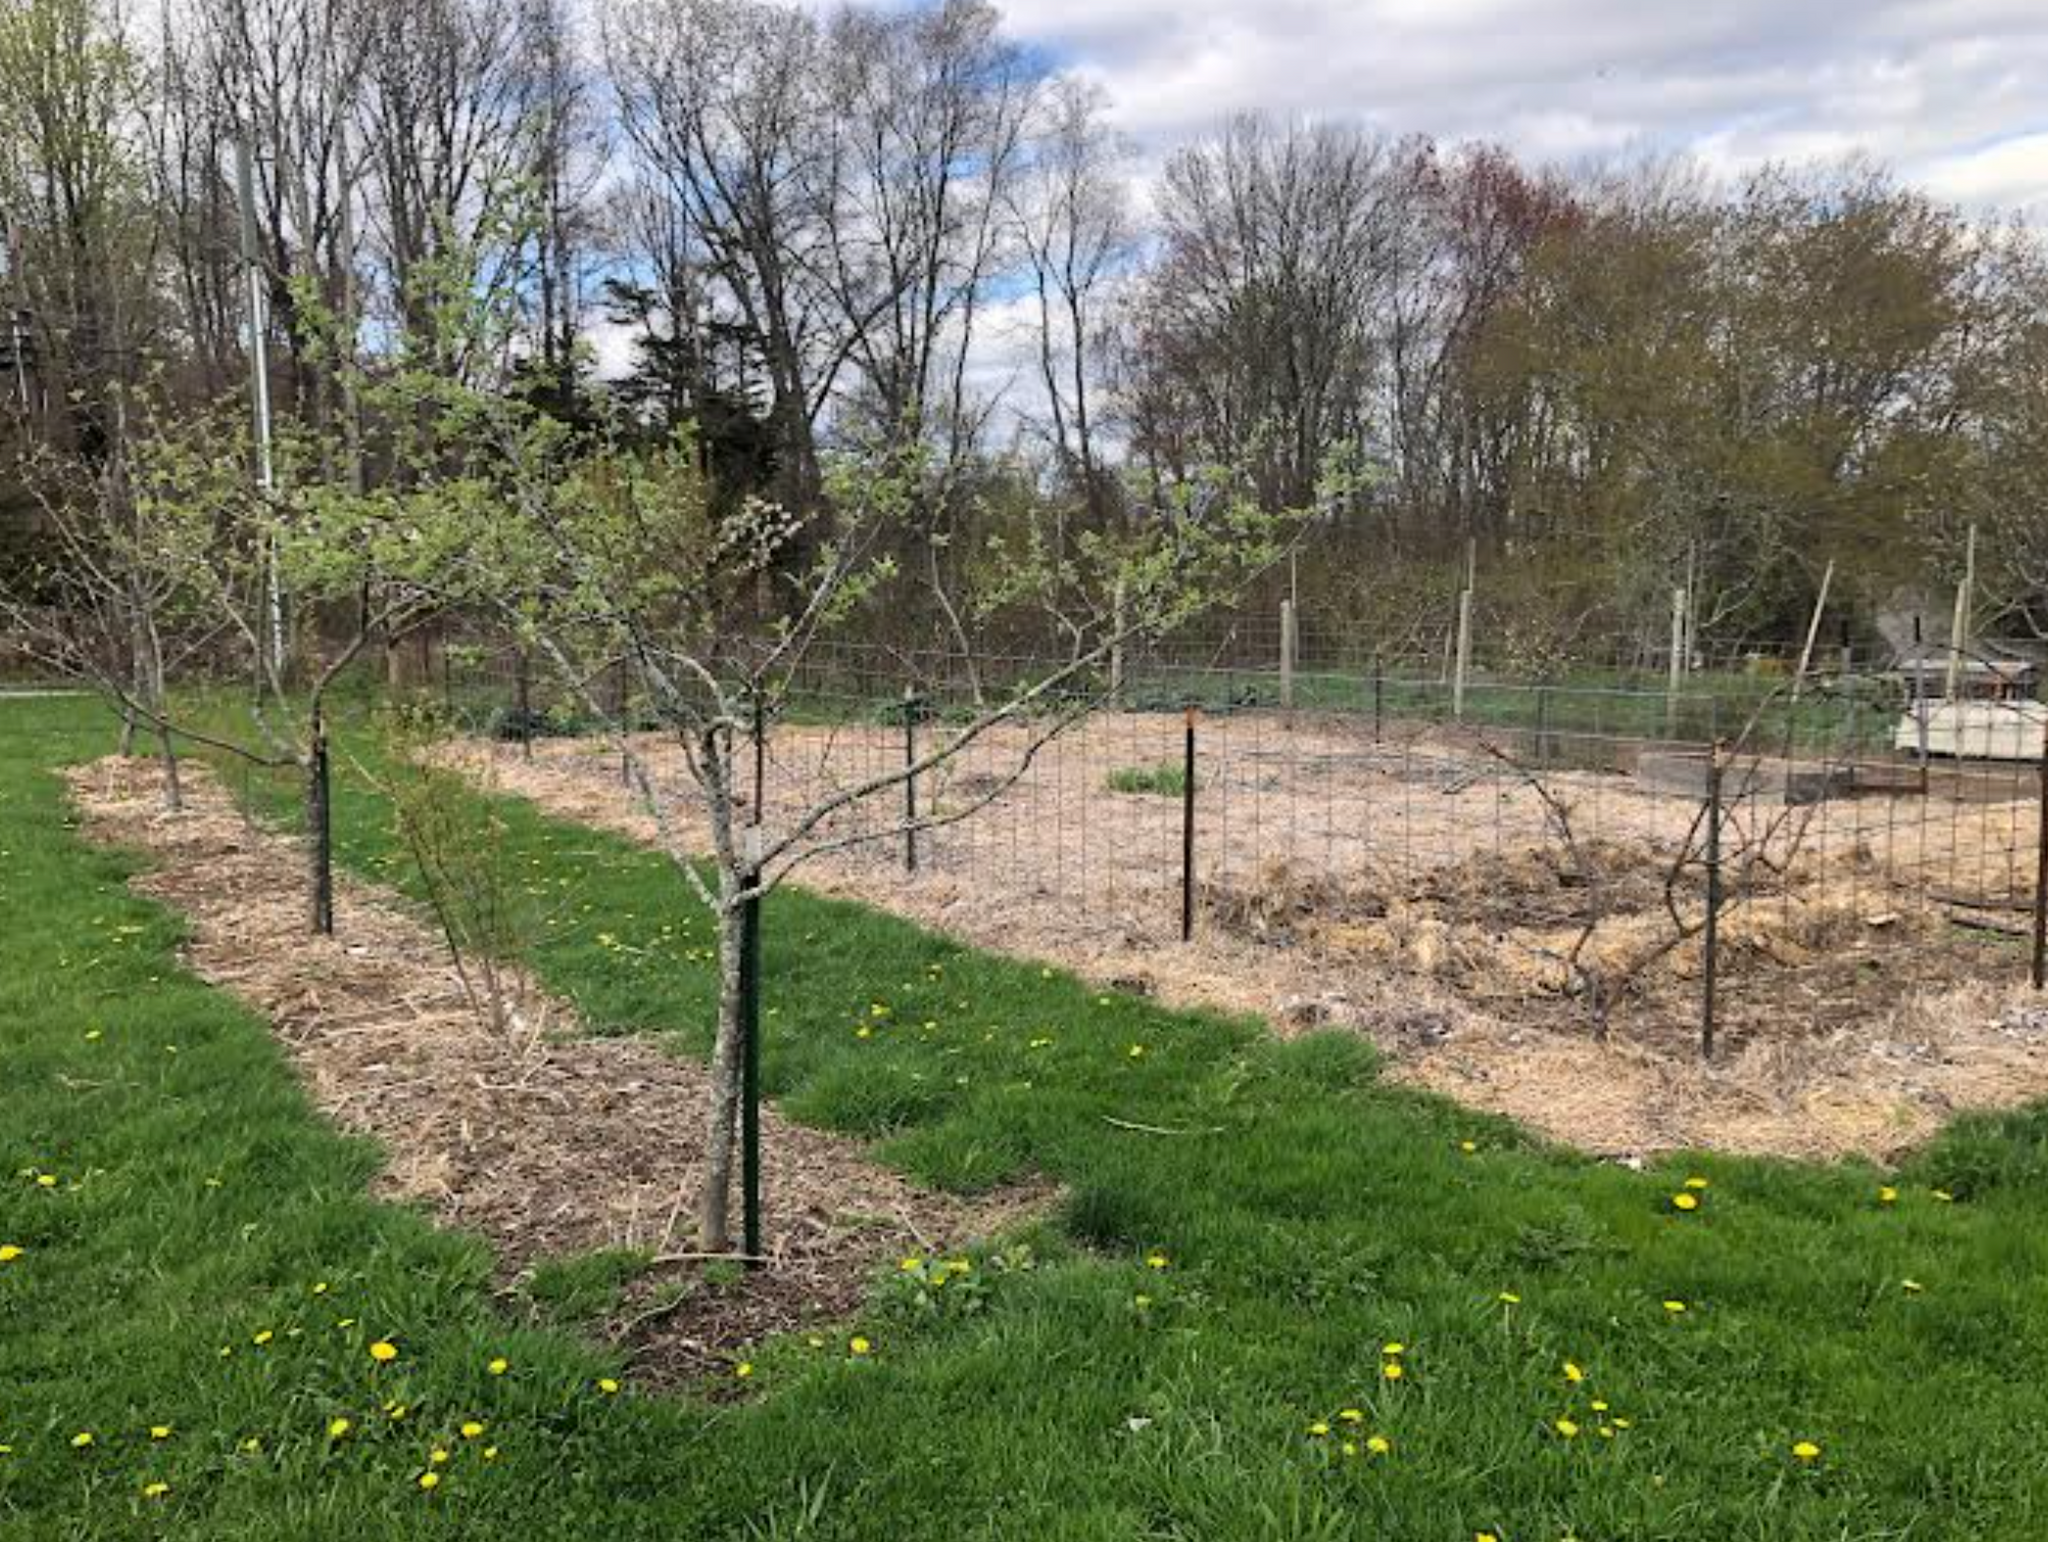 Get Your Grove On! Mastering Front Yard Fruit Trees, Grape Vines, & Berries - 90 min